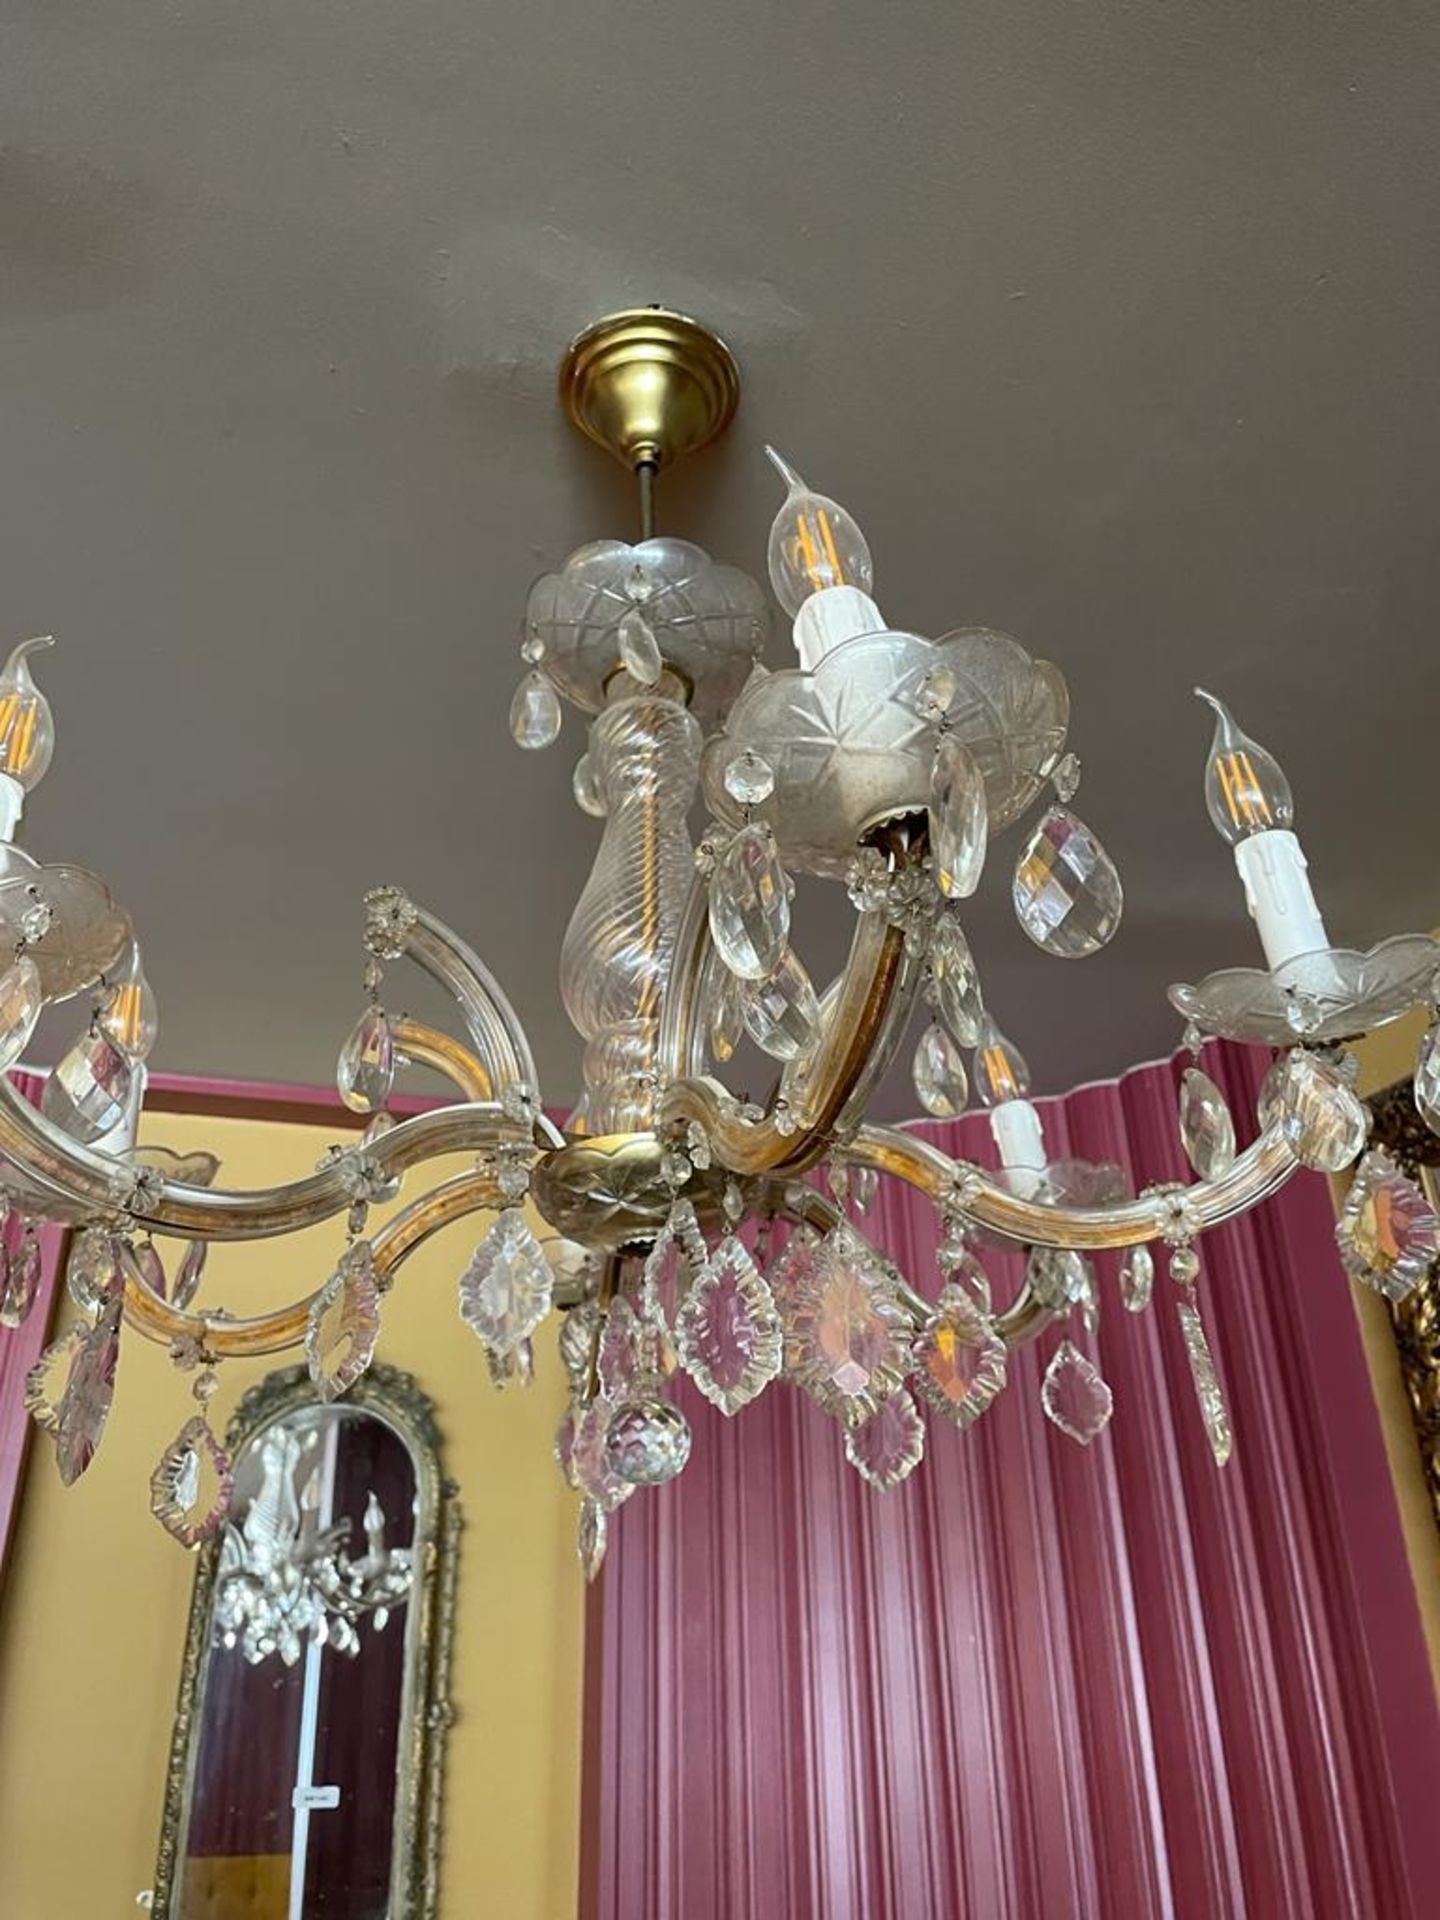 1 x Chandelier With Six Candle Lights - Ref: BK145 - CL686 - Location: Altrincham WA14This lot was - Image 2 of 5